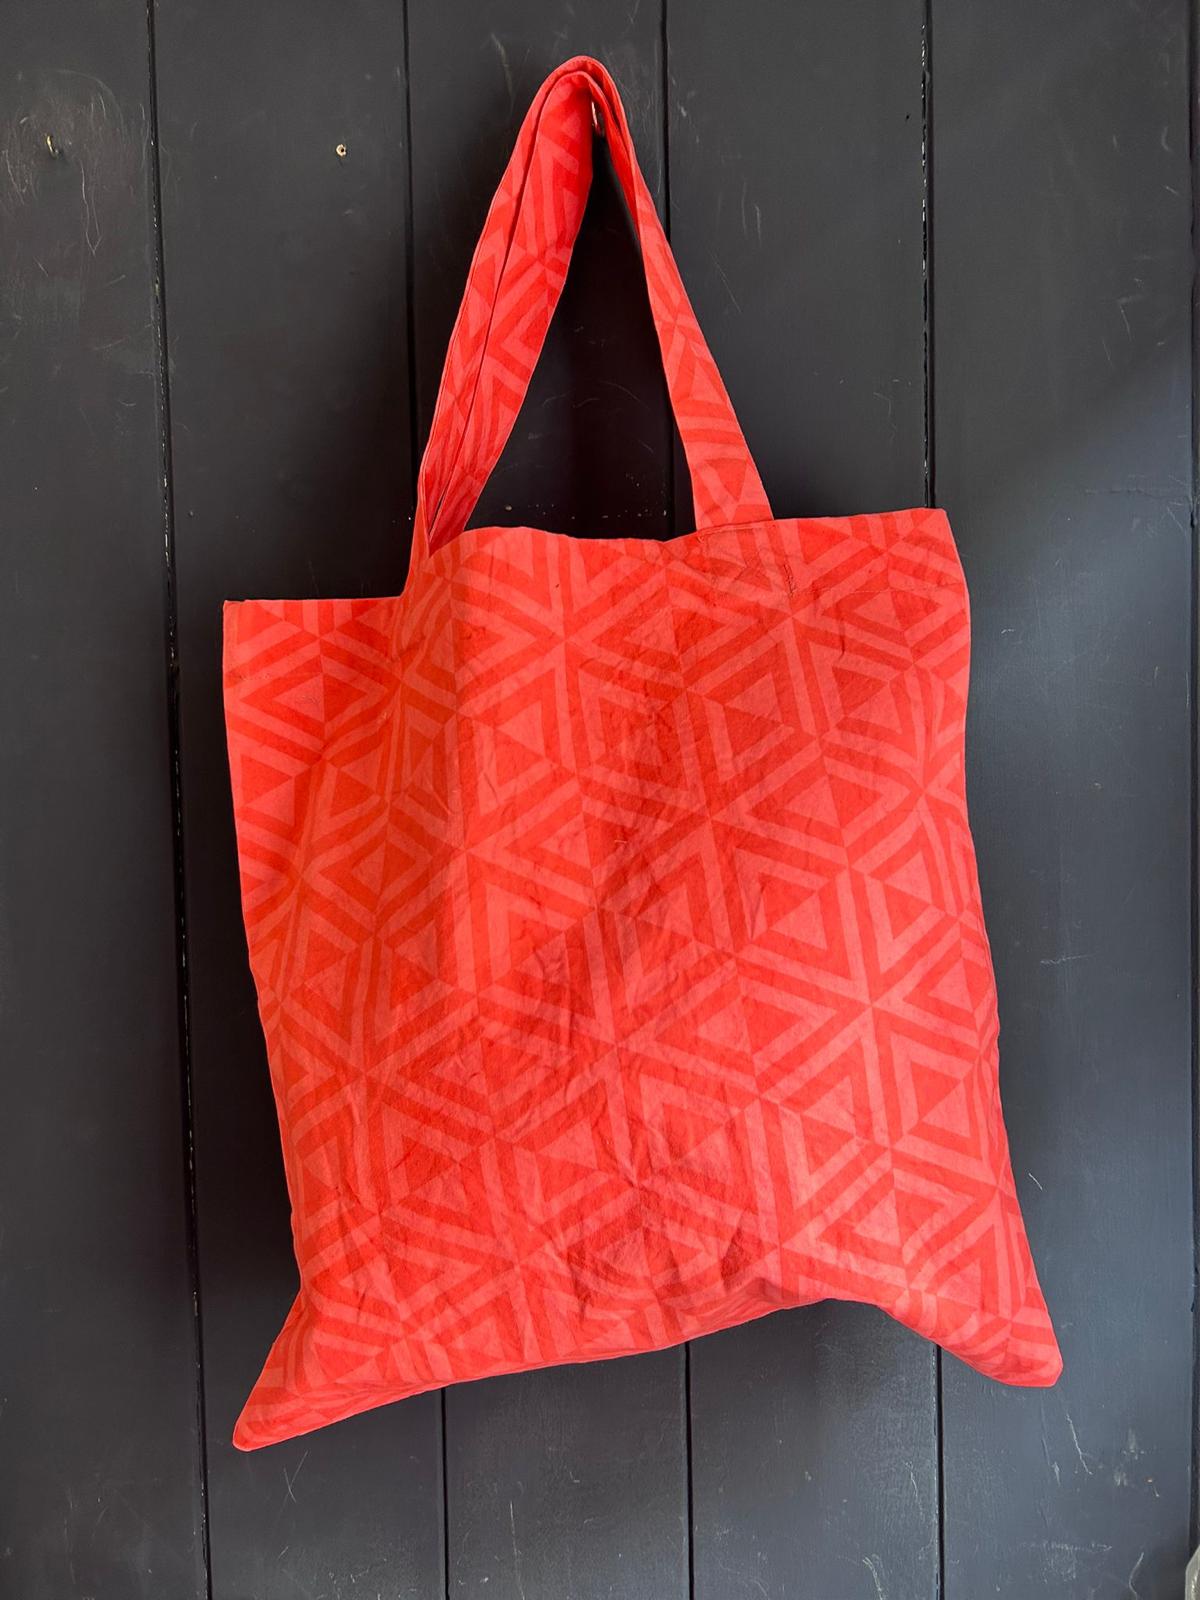 Giant Tote Bag in 'Pink Honeycomb'